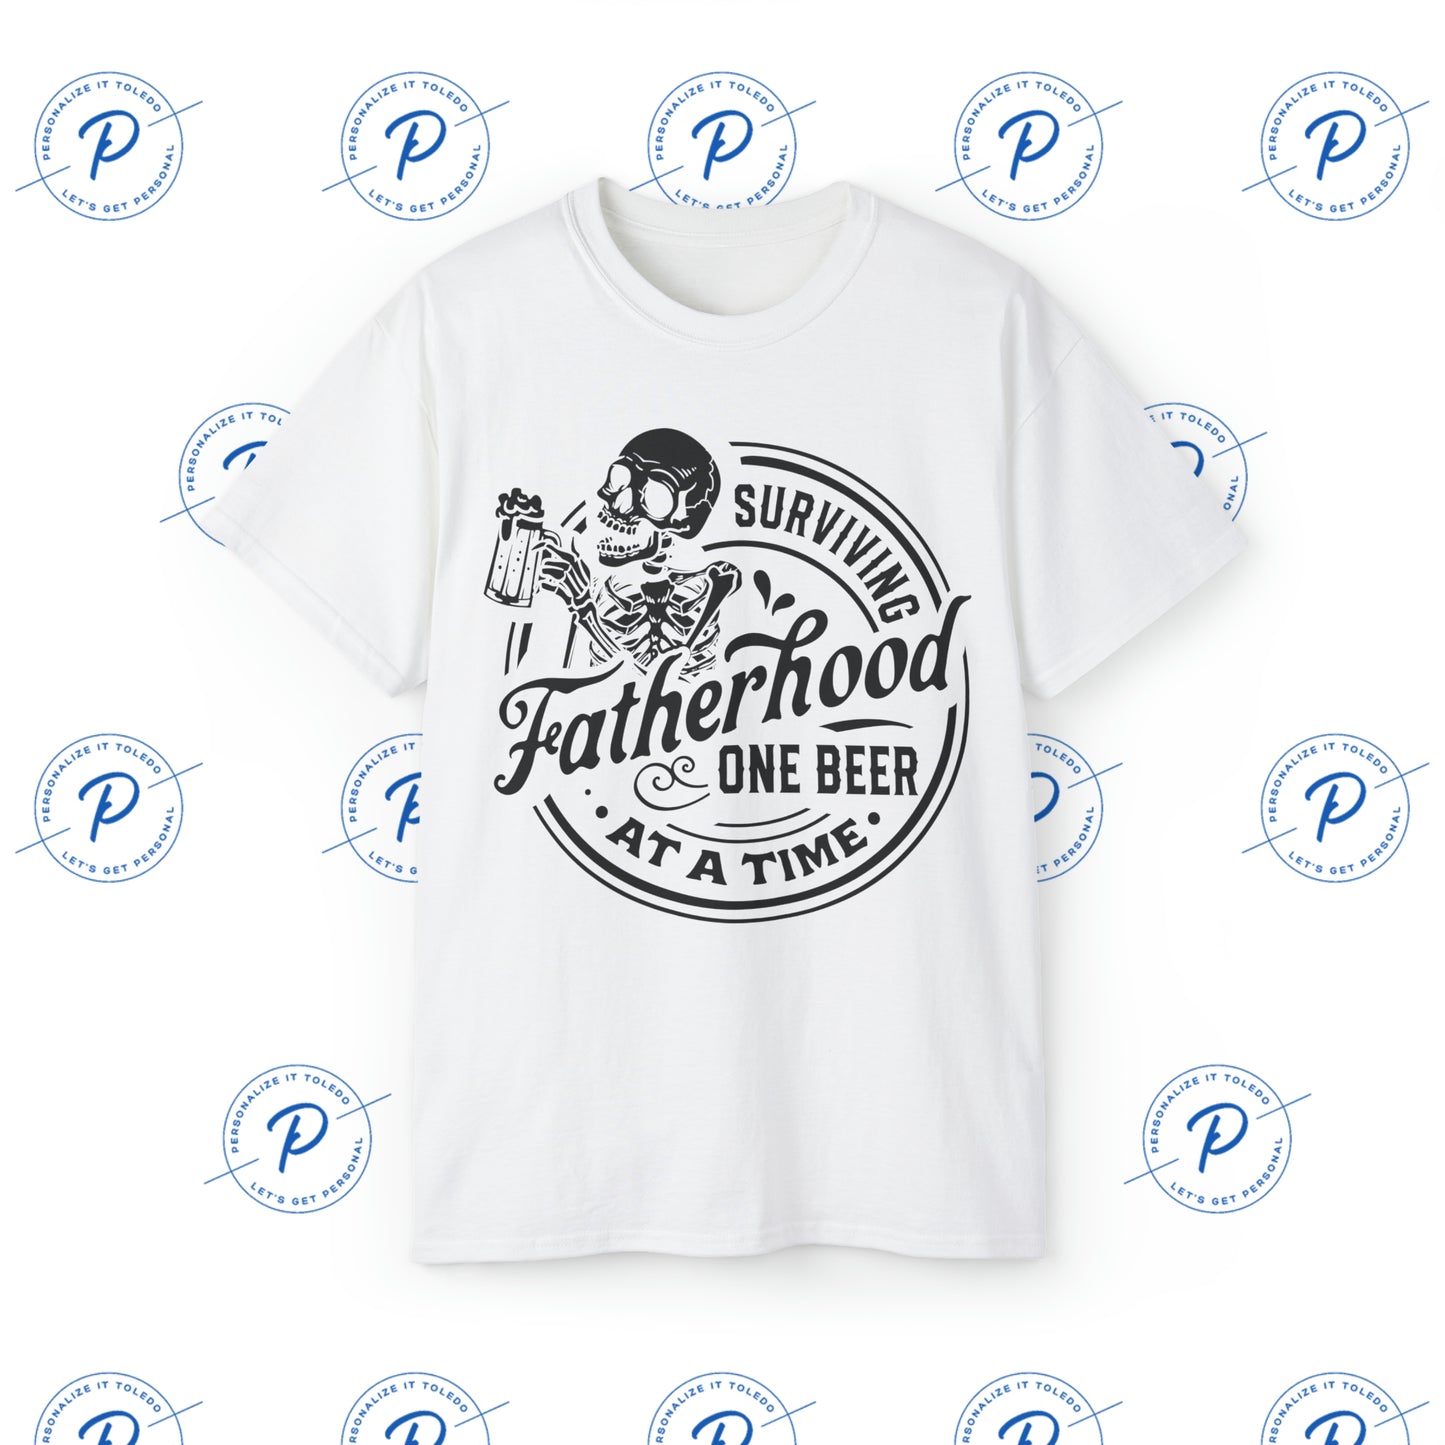 Surviving Fatherhood One Beer At A Time Shirt, Fatherhood Apparel for Dads